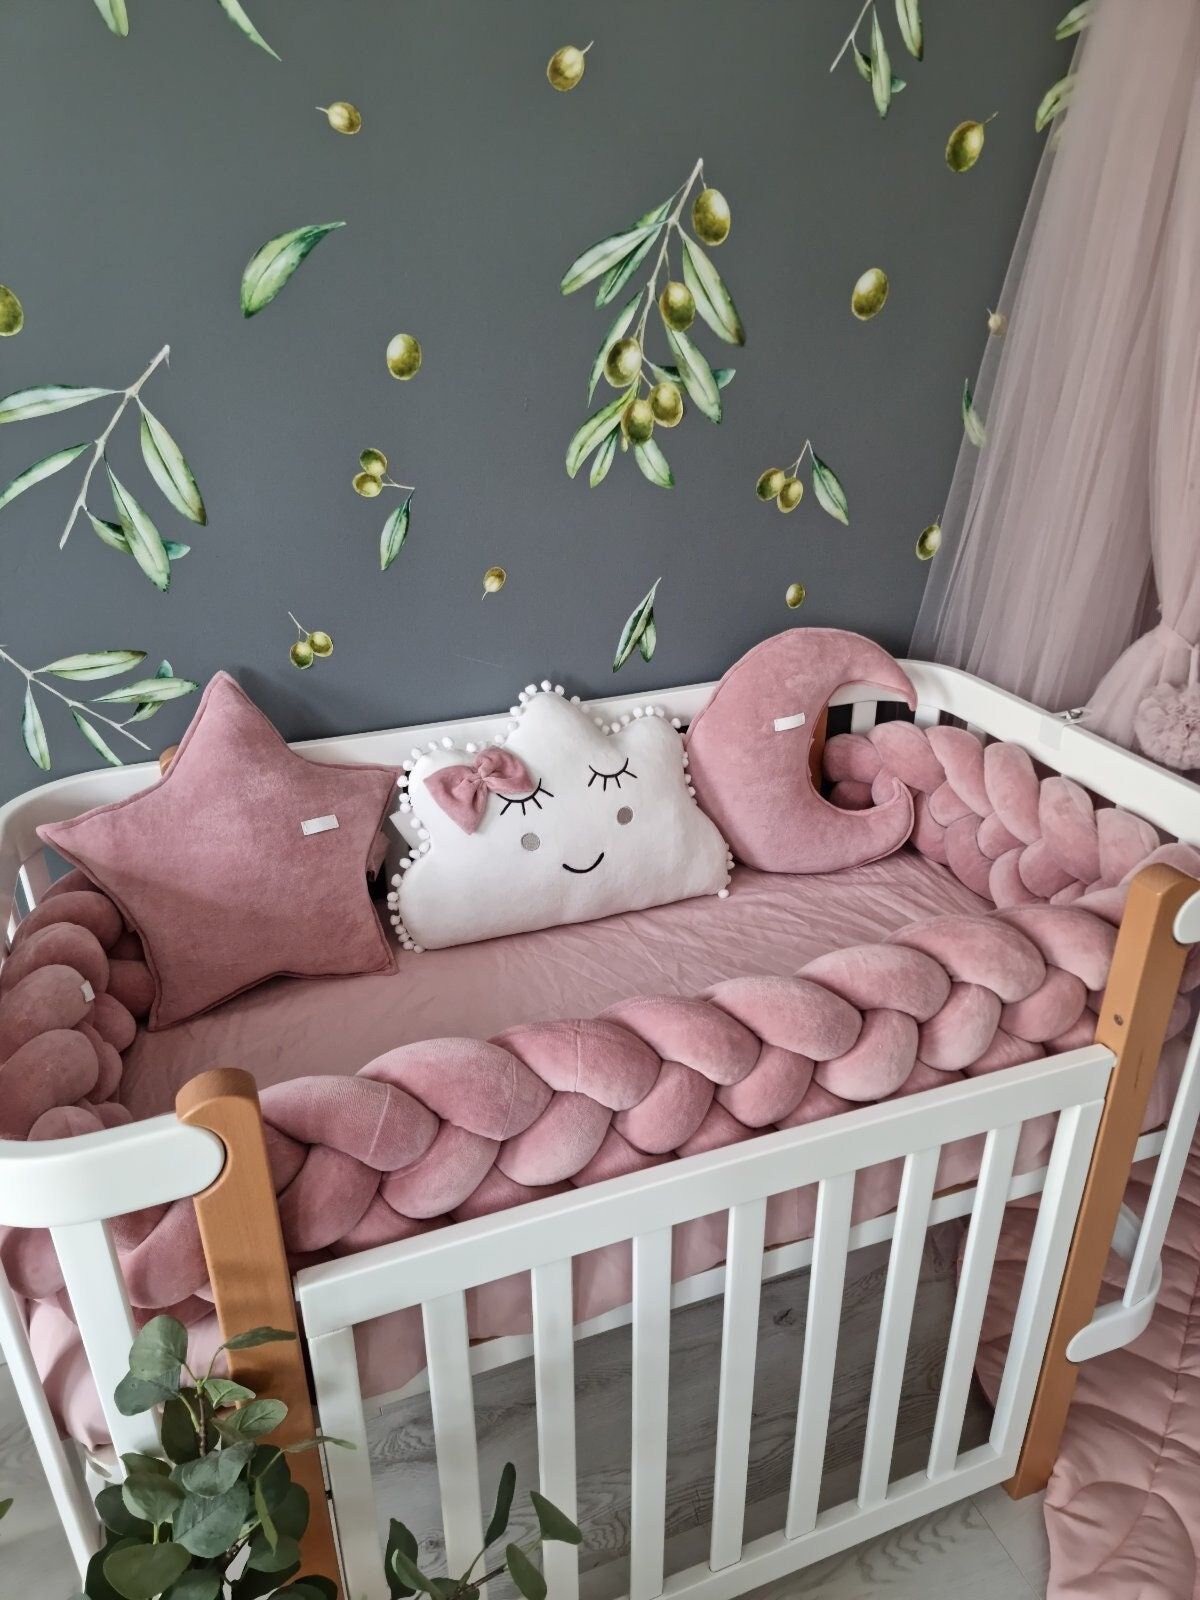 Trendy and Stylish Crib Bedding Options
for Your Little Princess